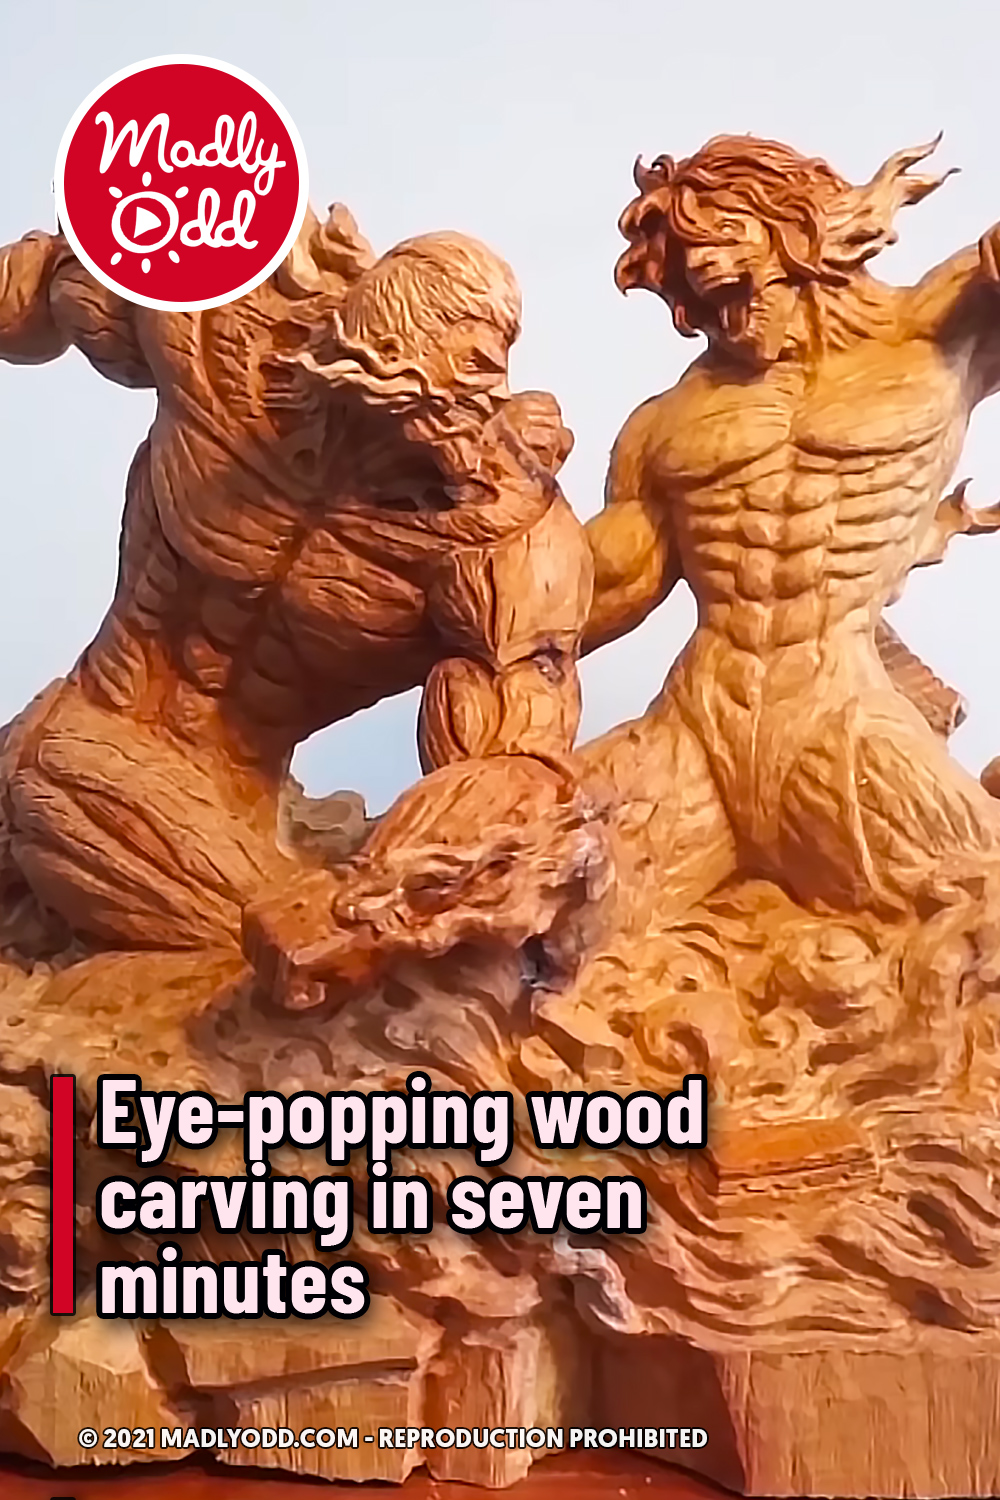 Eye-popping wood carving in seven minutes